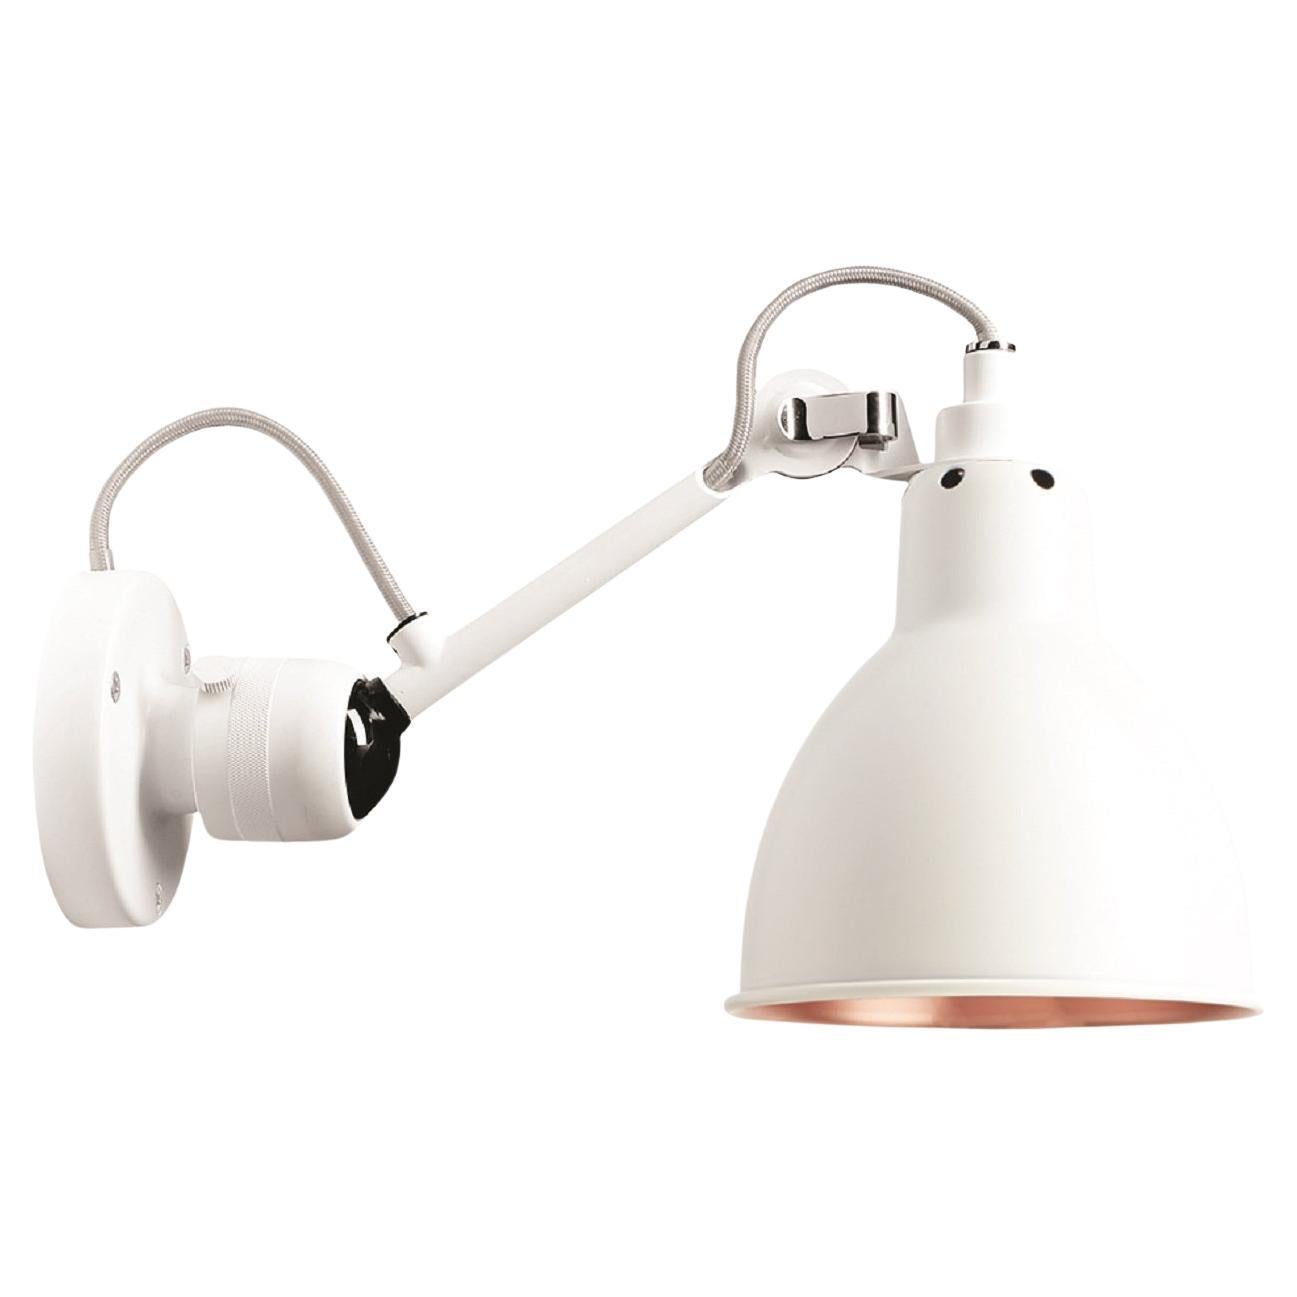 DCW Editions La Lampe Gras N°304 Wall Lamp in White Arm and White Copper Shade